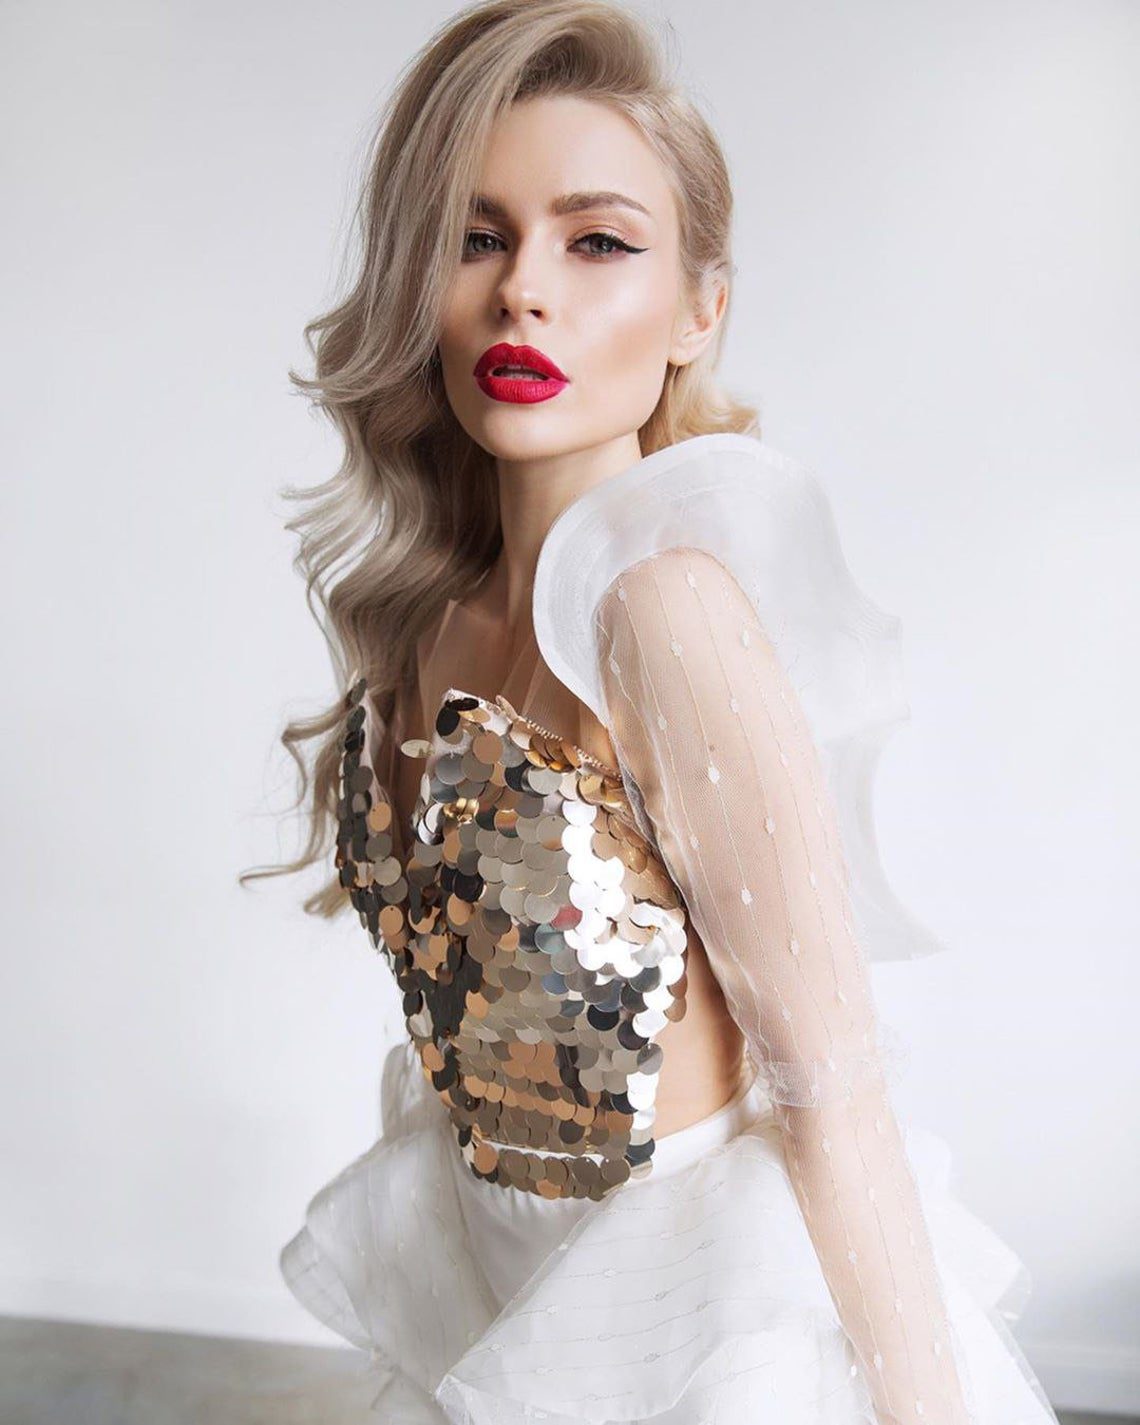 Uniuque wedding dress Crappie with the glittering bodice from Rara Avis designer available in Dell'Amore Bridal, Auckland New Zealand 3